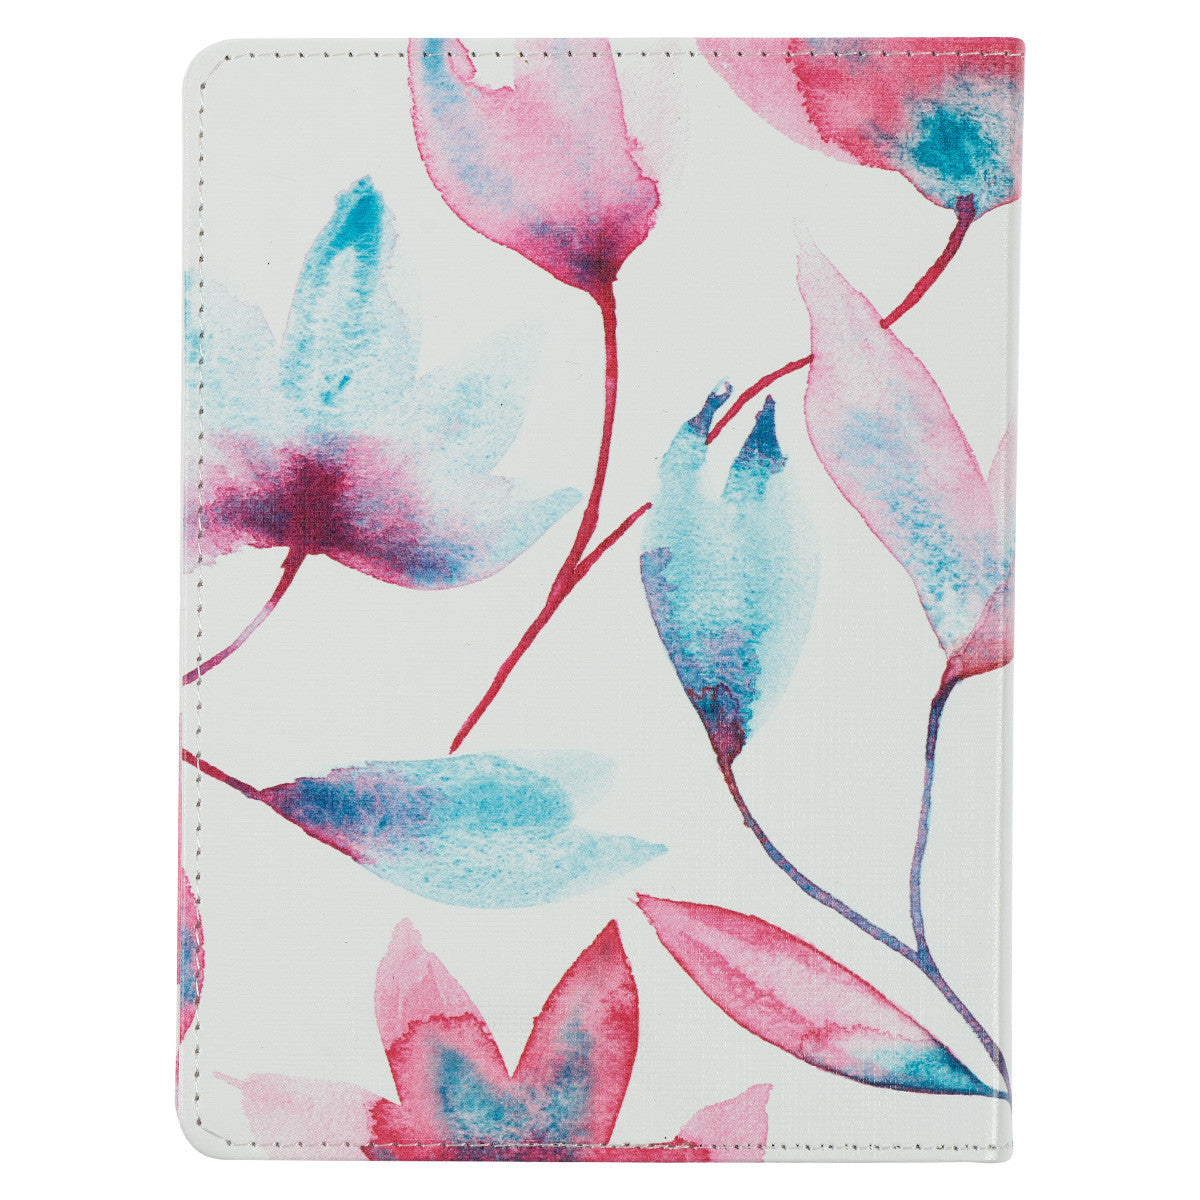 Embrace the Journey Pink Petals Handy-size Faux Leather Journal - The Christian Gift Company